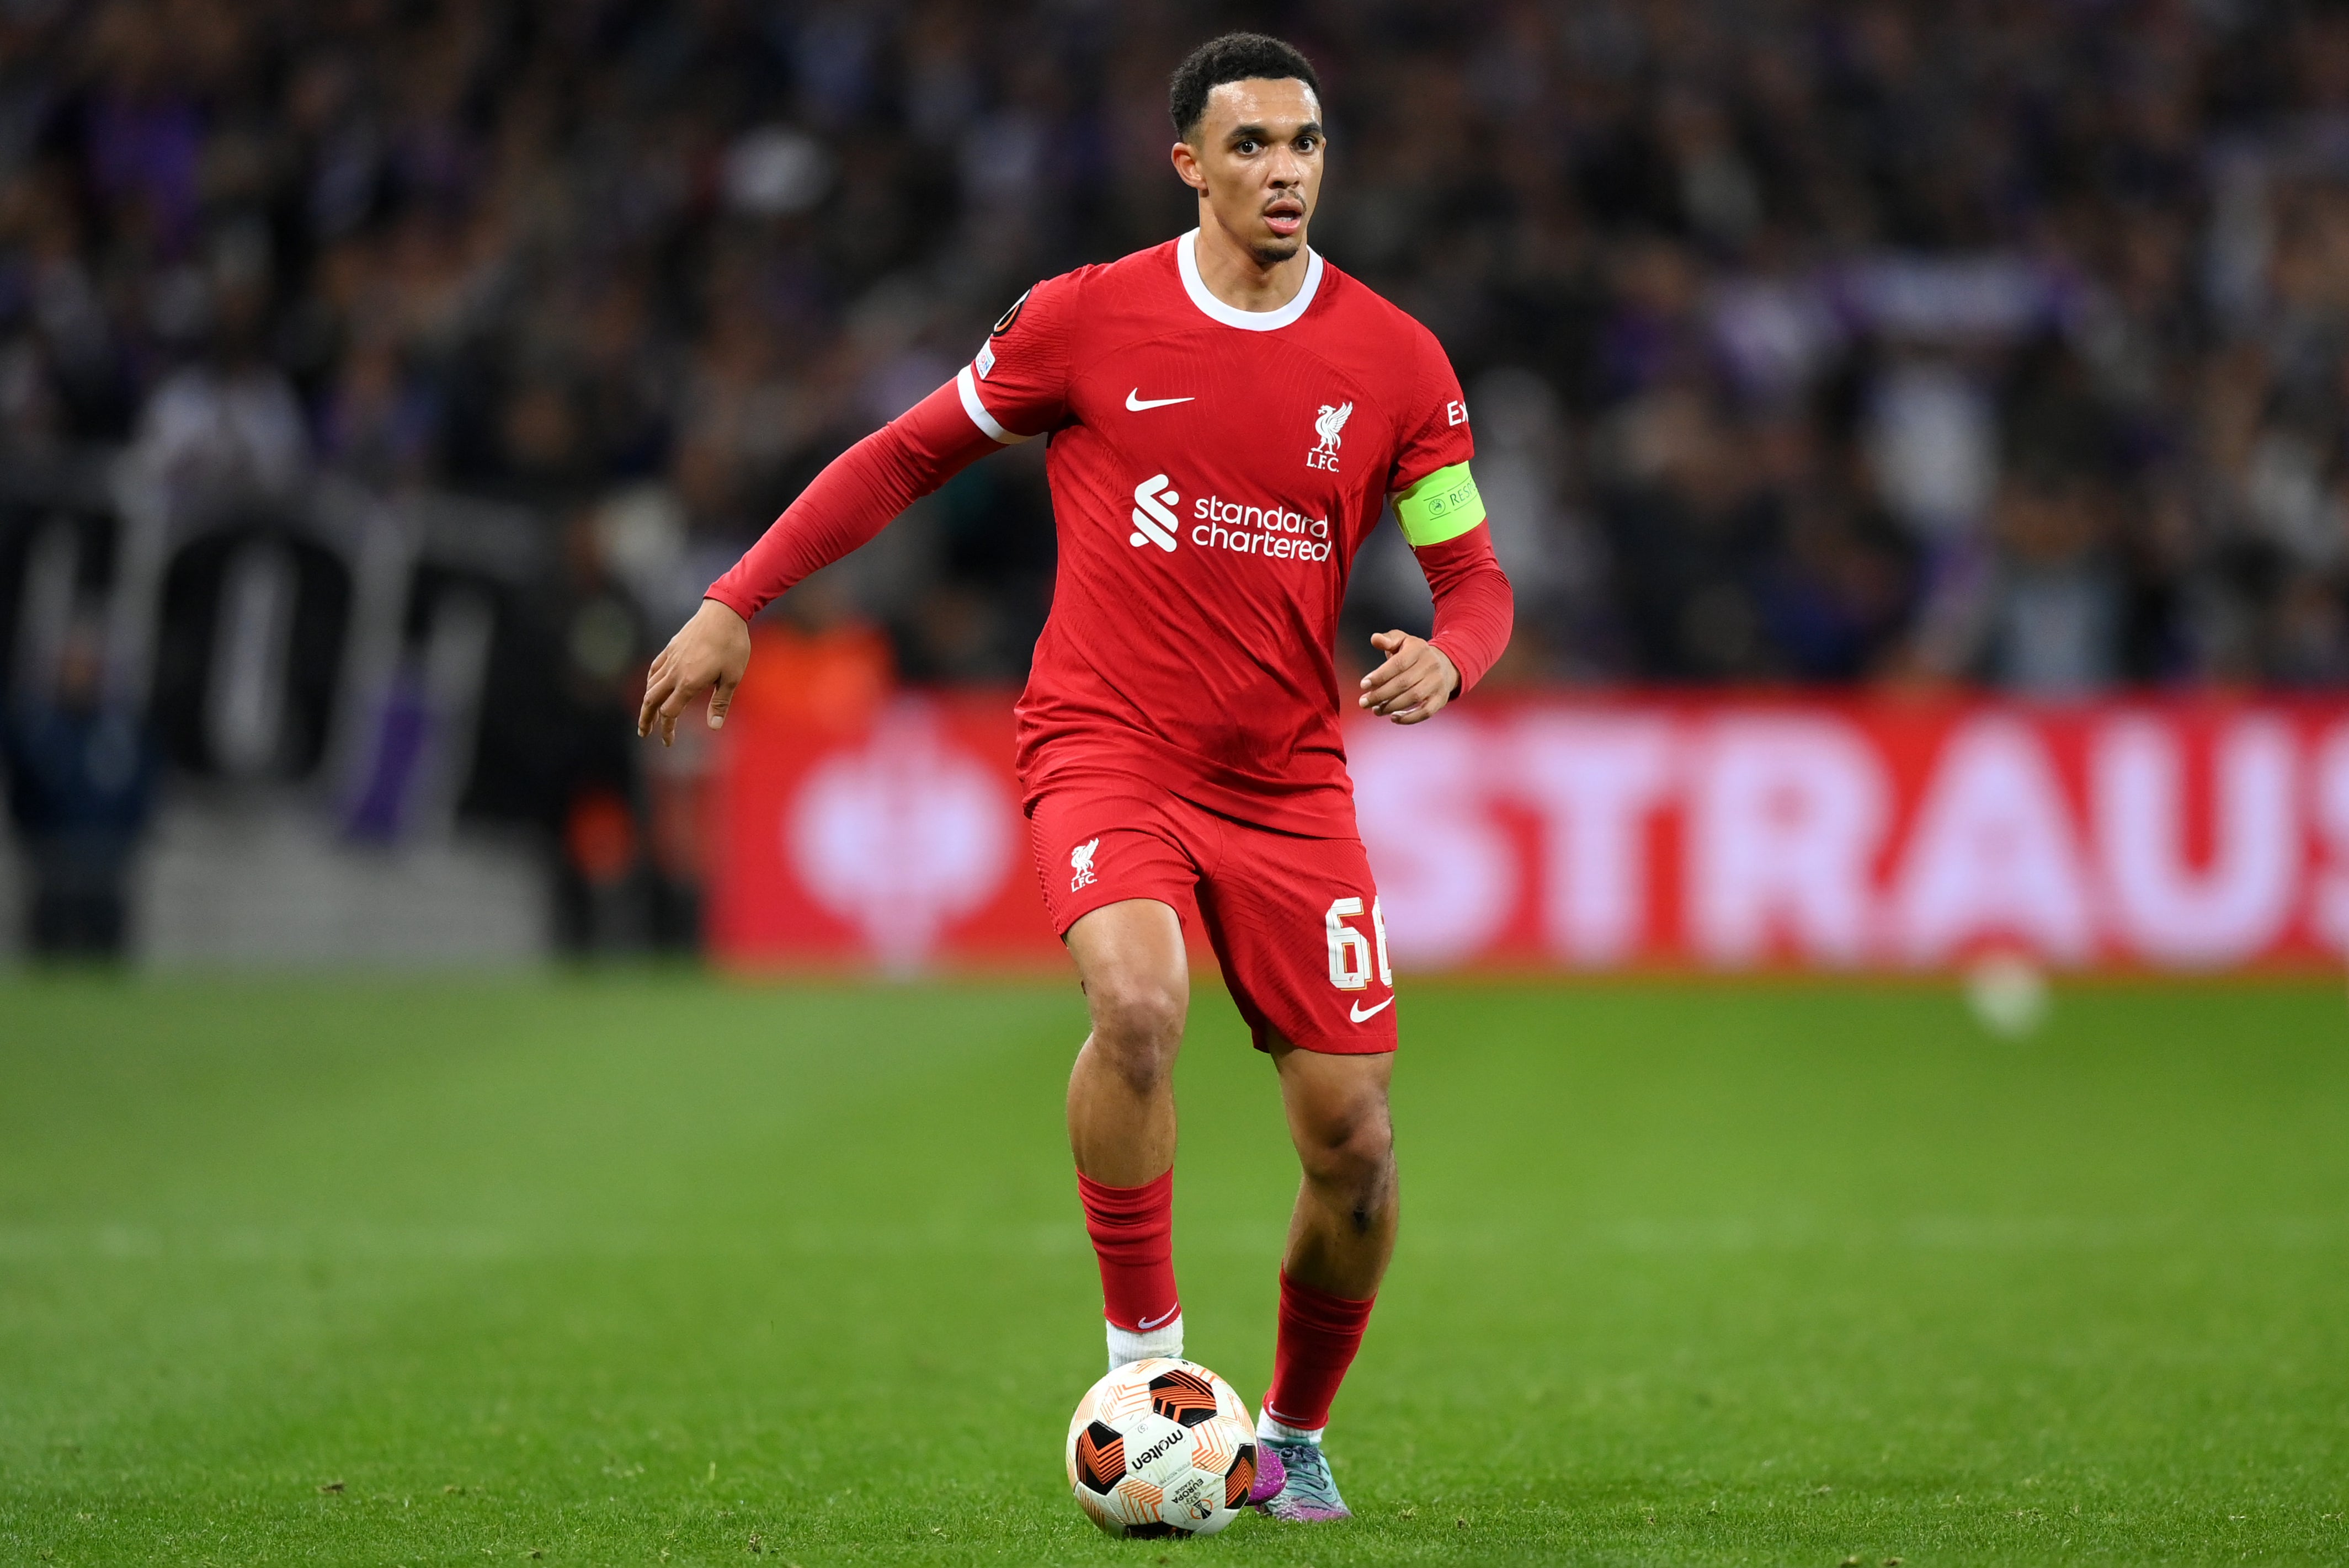 Trent Alexander-Arnold has taken on a new midfield role with England